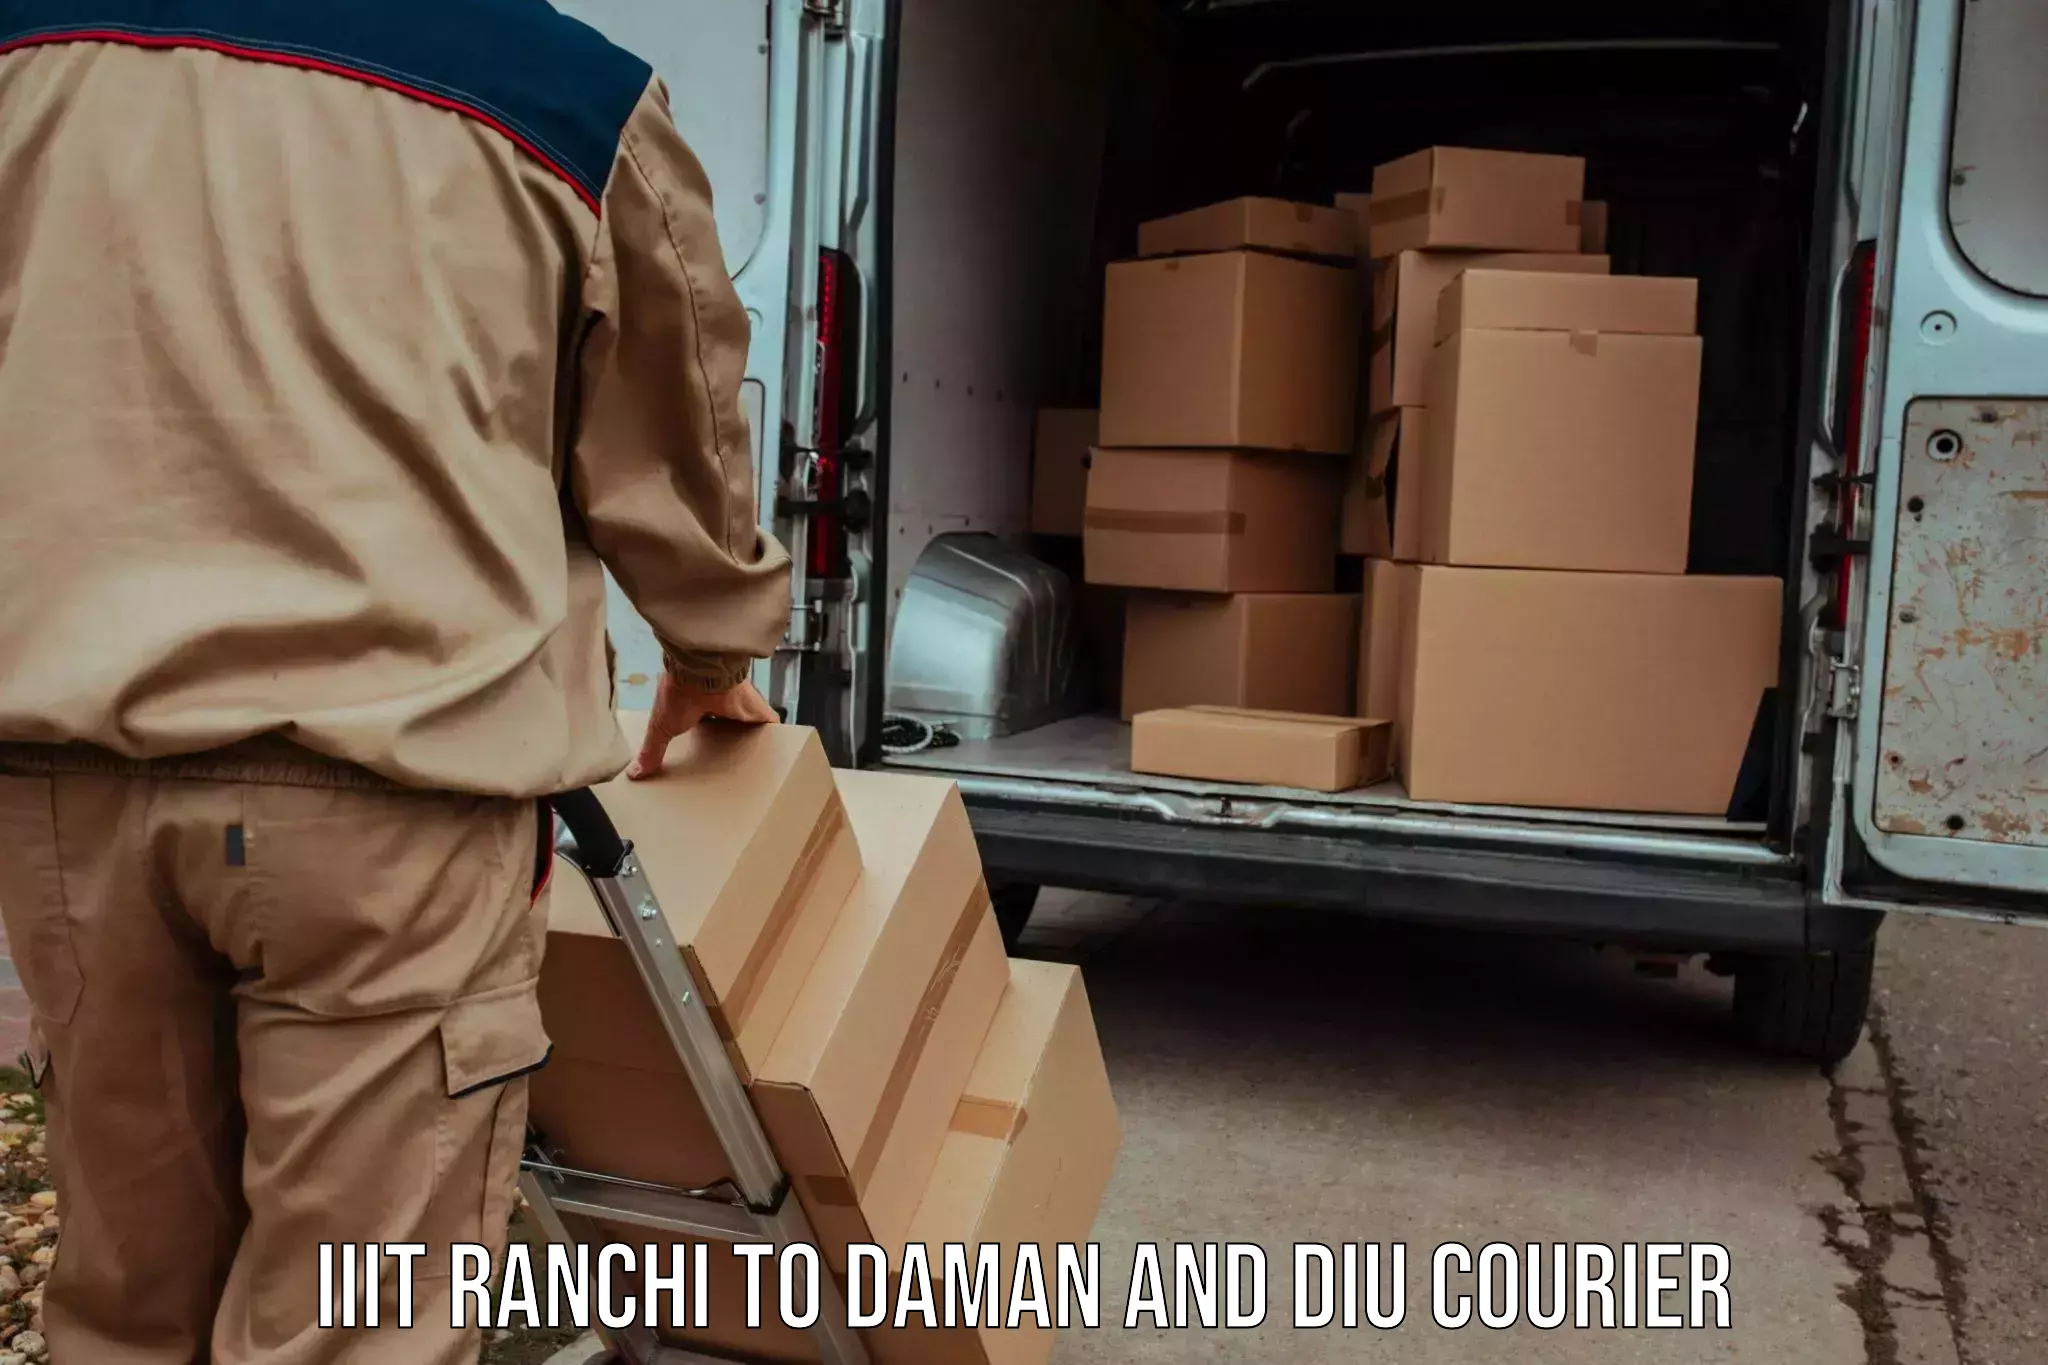 User-friendly courier app IIIT Ranchi to Diu